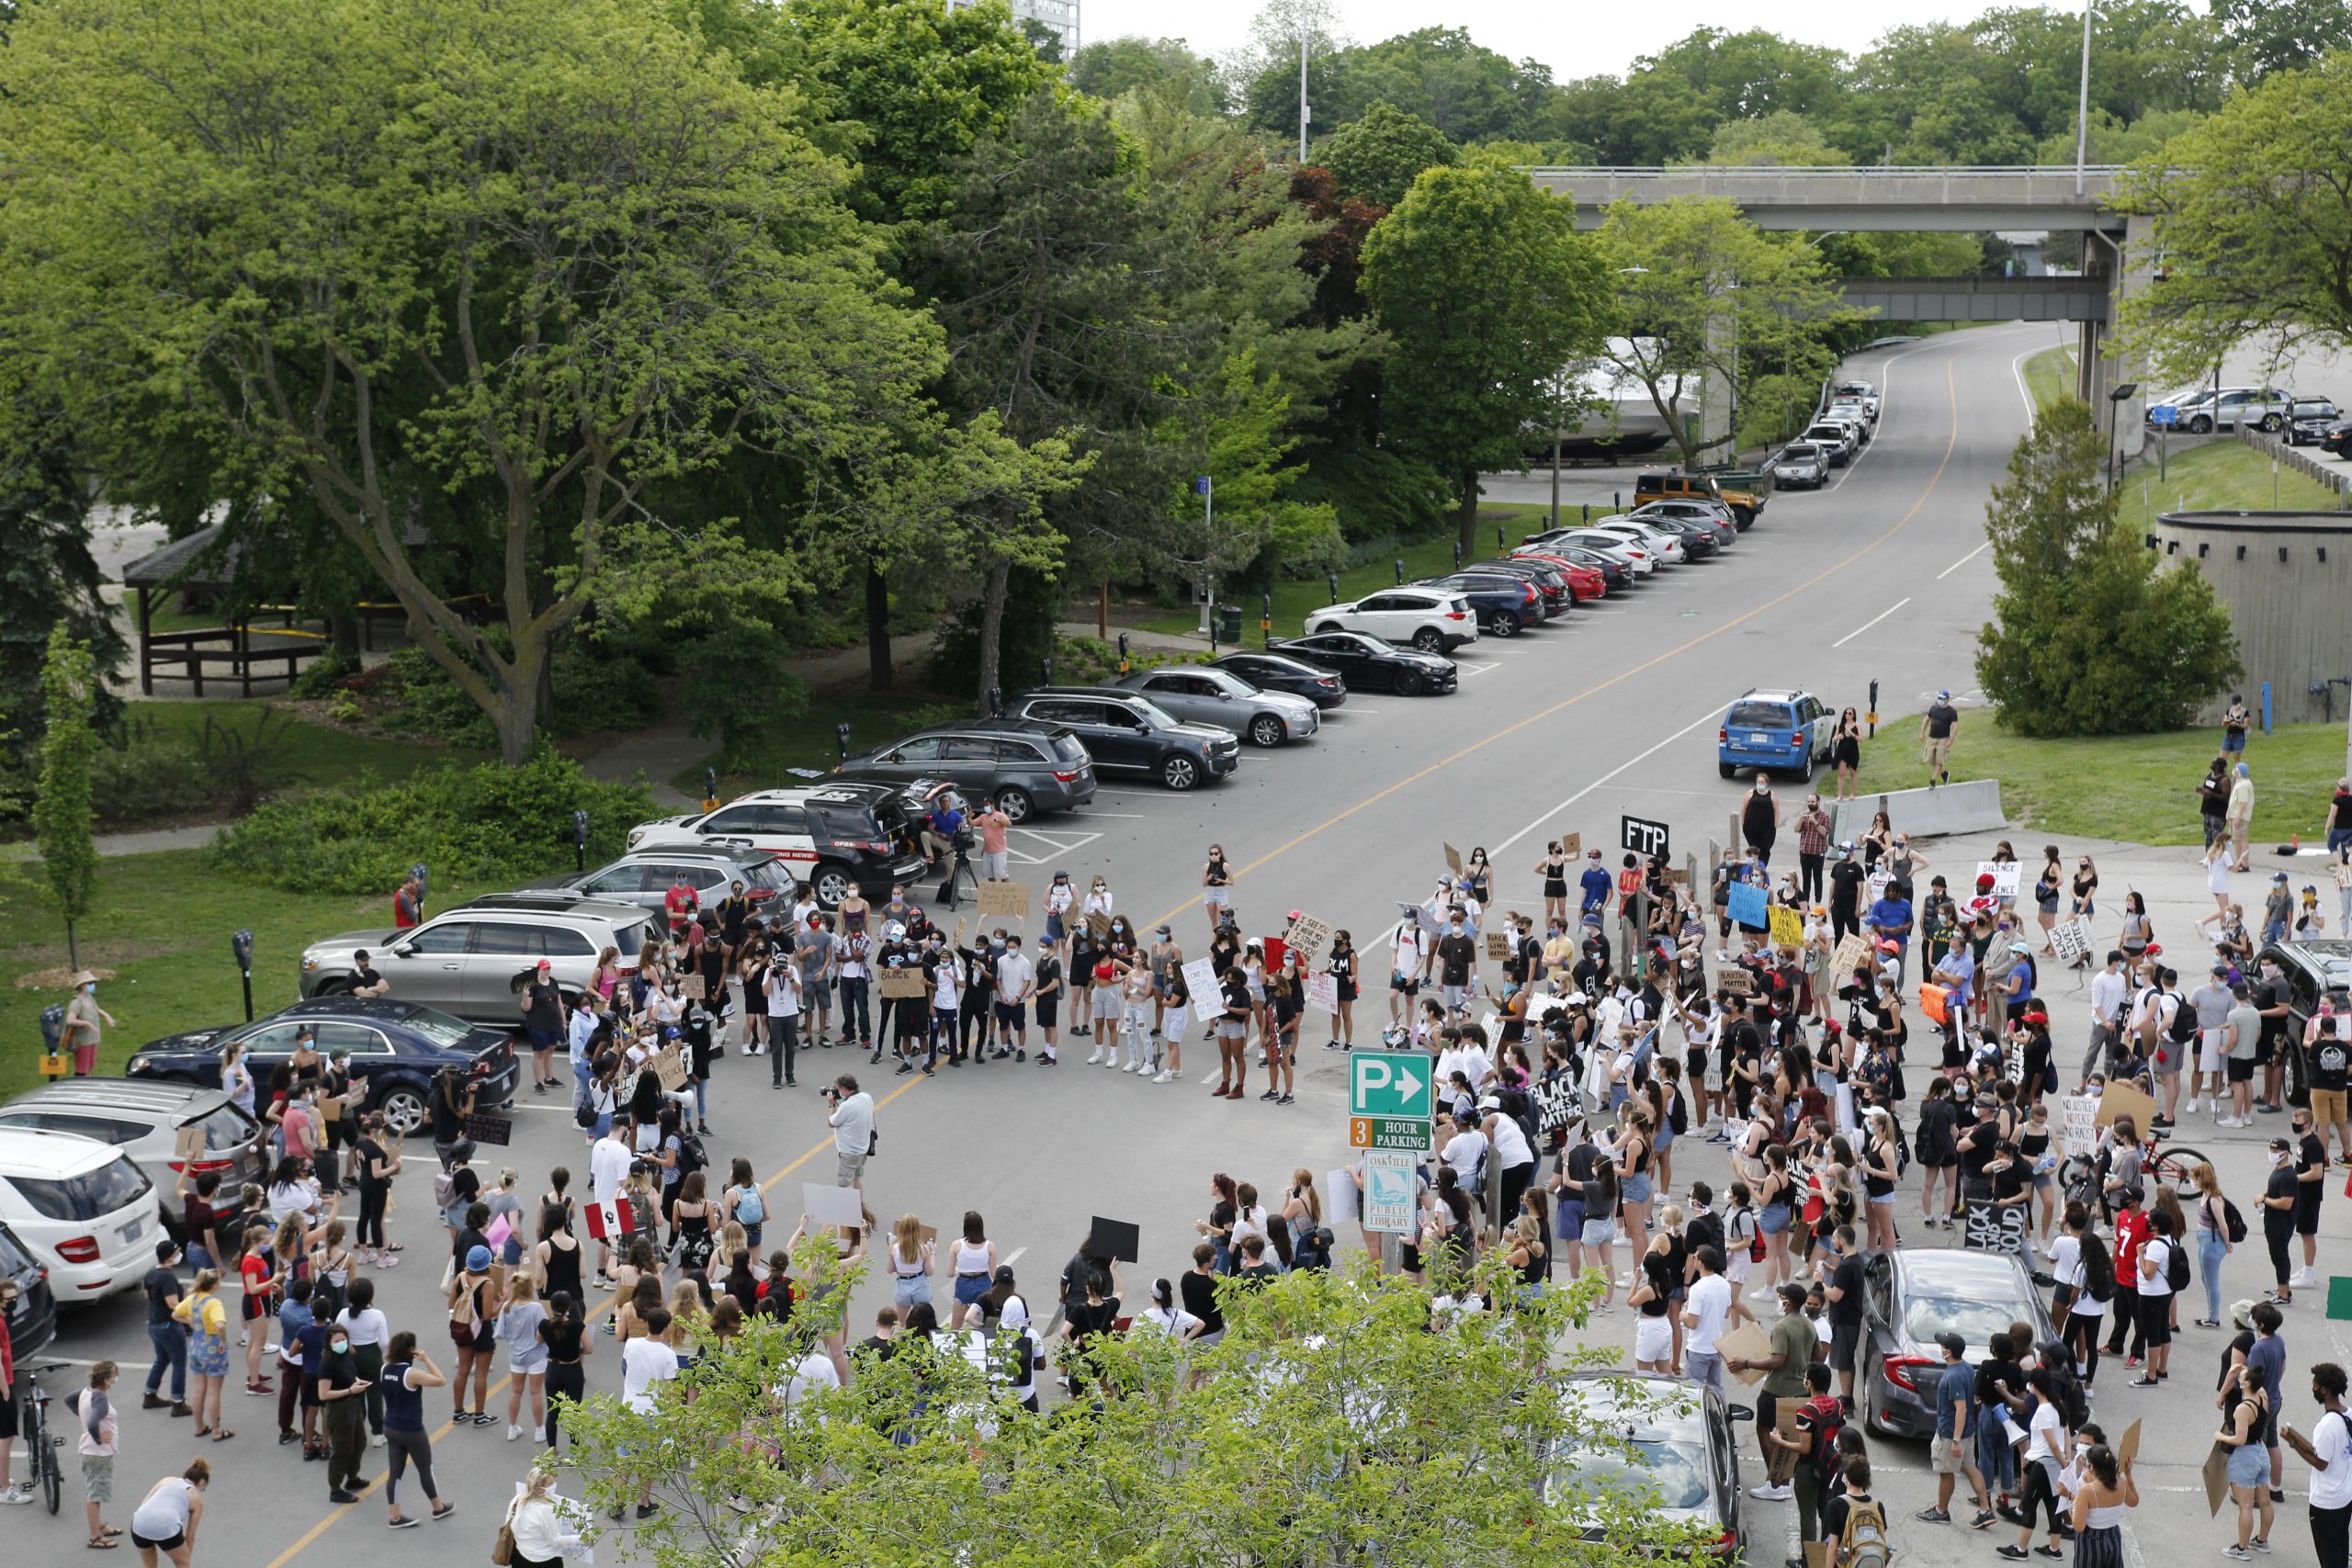 BLM march Oakville | The group listening to the march organizers speak in the parking lot behind the Central Branch of the Oakville Library. | Thomas Desormeaux